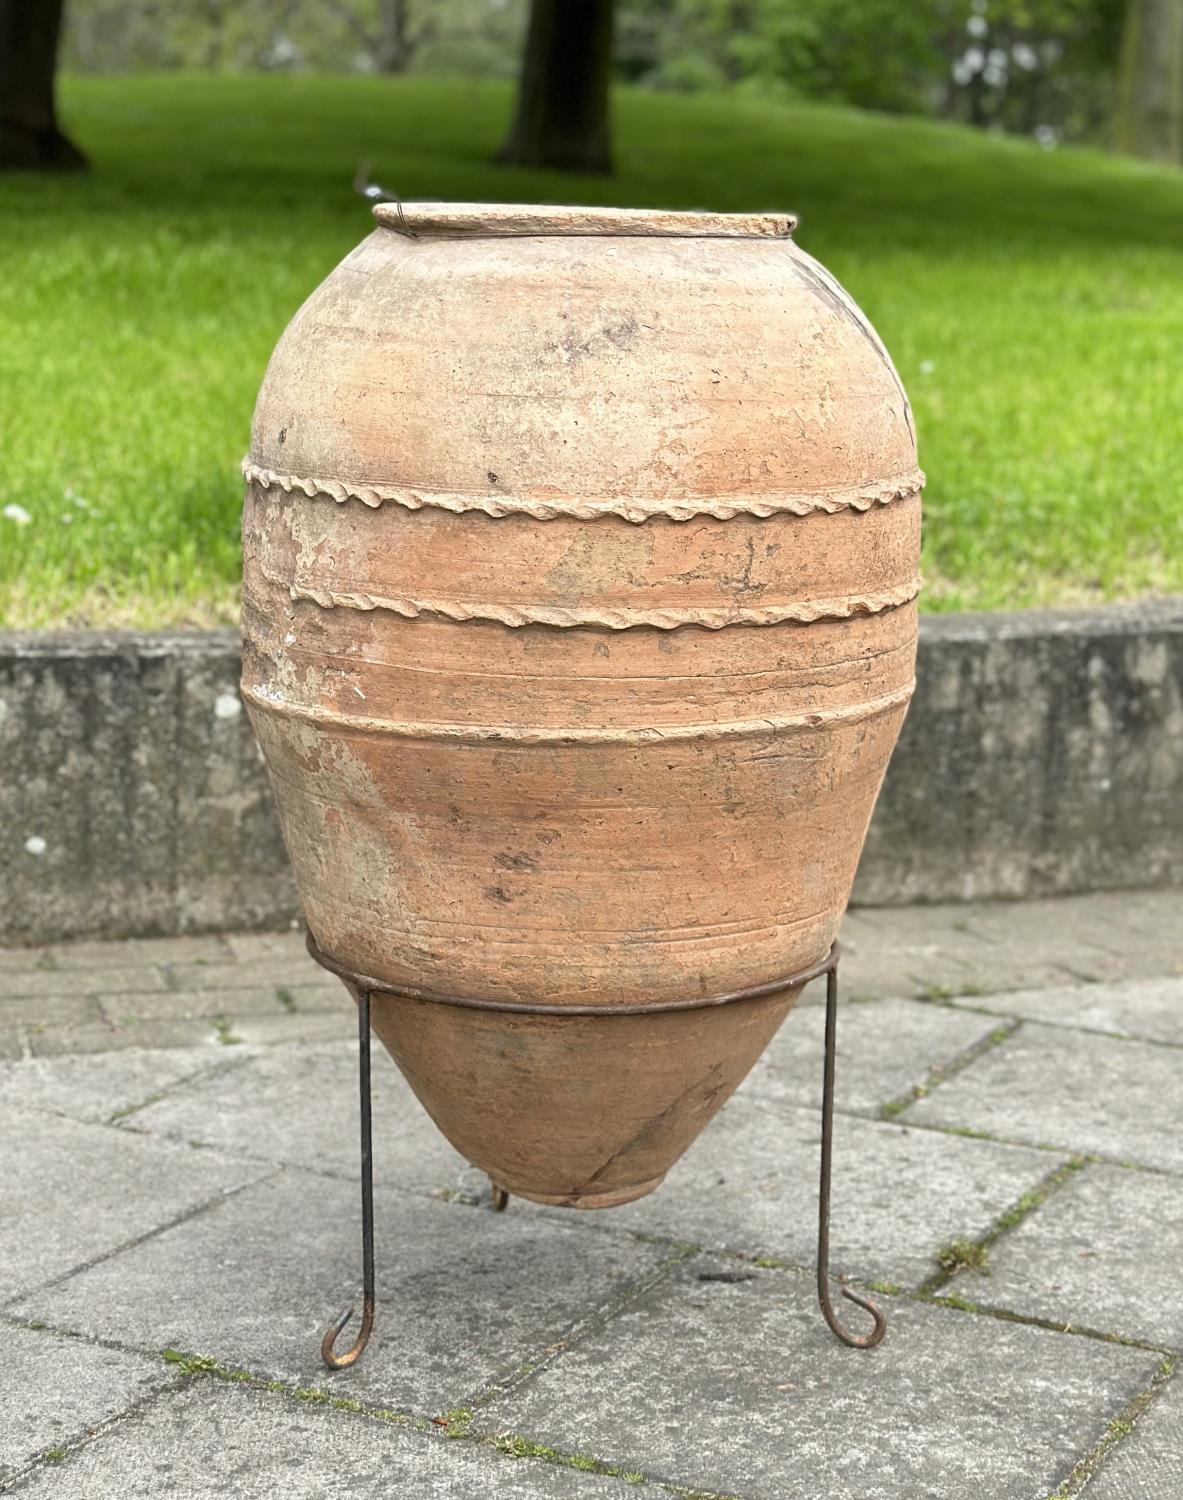 GARDEN OLIVE STYLE JAR PLANTER, well weathered terracotta, with pressed banded detail raised on - Image 2 of 8